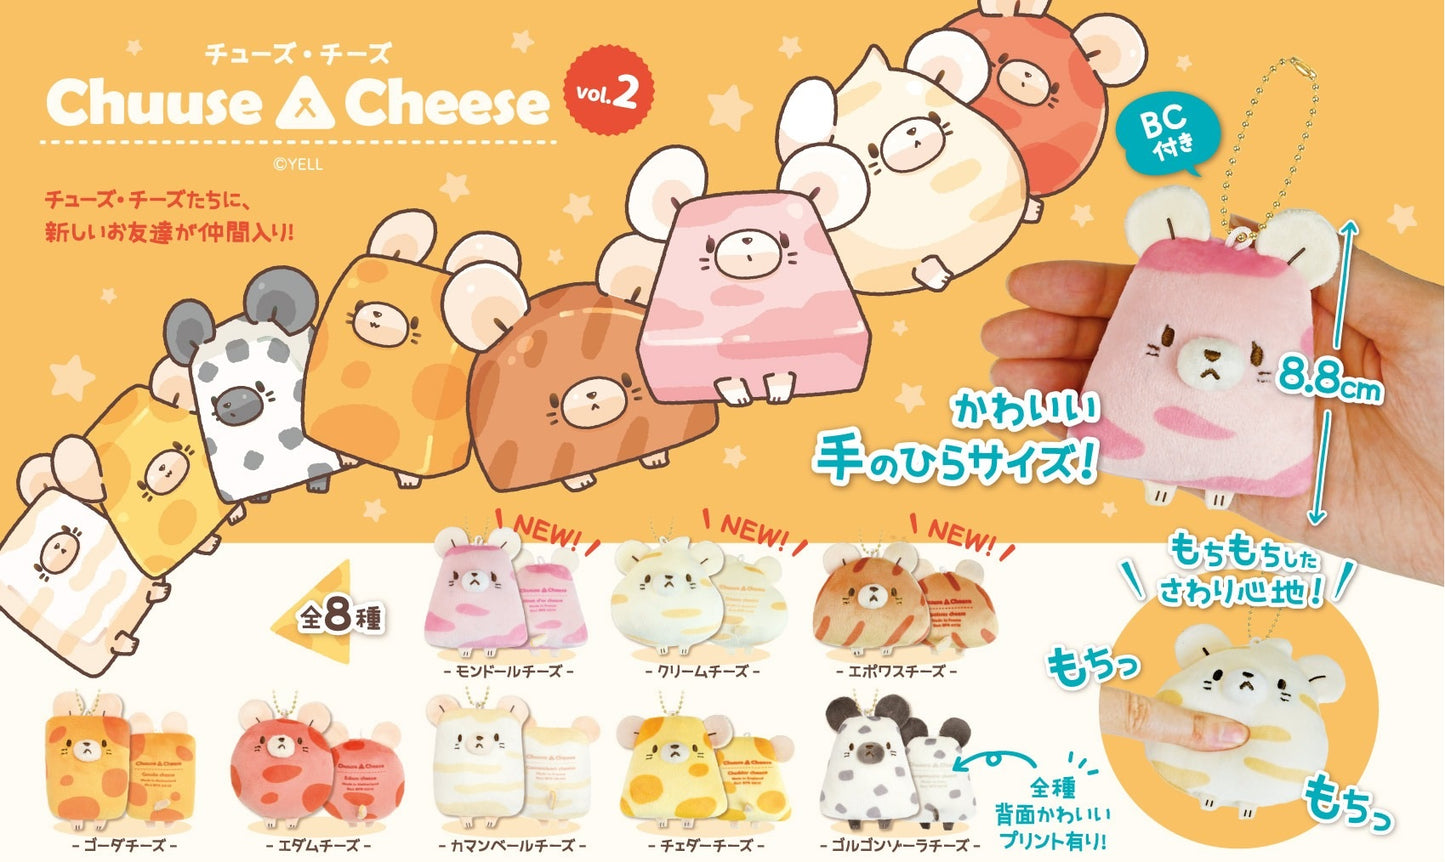 63376 CHEESE MOUSE PLUSH CHARM-6